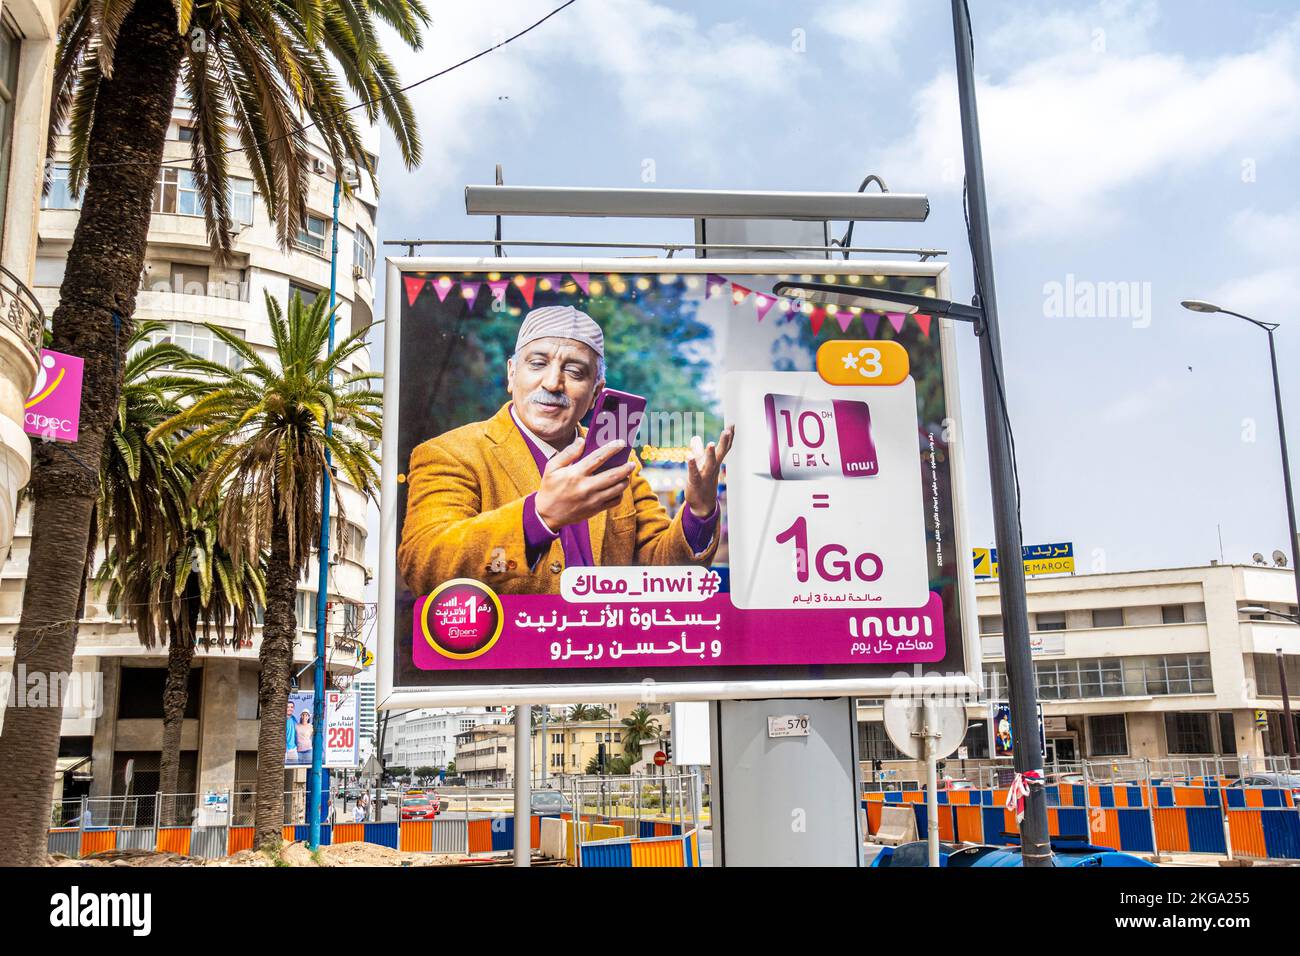 Inwi telecommunications mobile carrier billboard, outdoor advertisement in Casablanca, Morocco Stock Photo